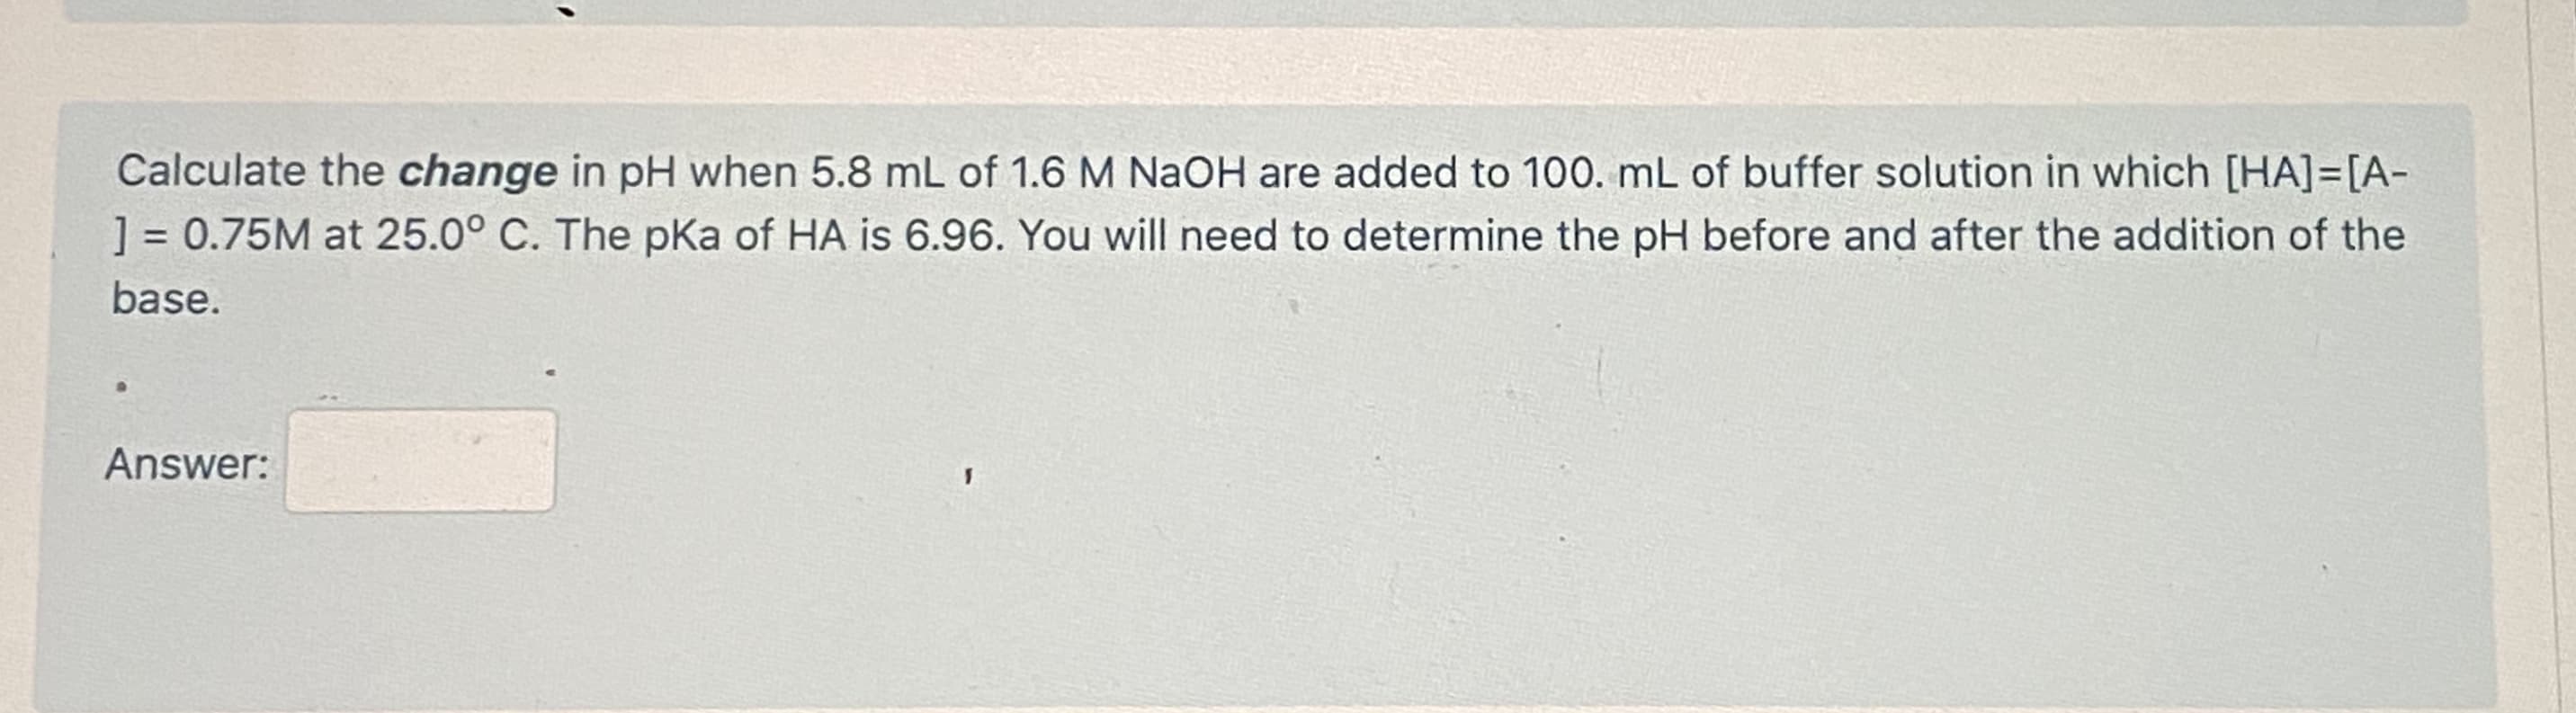 Calculate the change in pH when 5.8 mL of 1.6 M NaOH are added to 100. mL of buffer solution in which [HA]=[A-
] = 0.75M at 25.0° C. The pKa of HA is 6.96. You will need to determine the pH before and after the addition of the
%3D
base.
